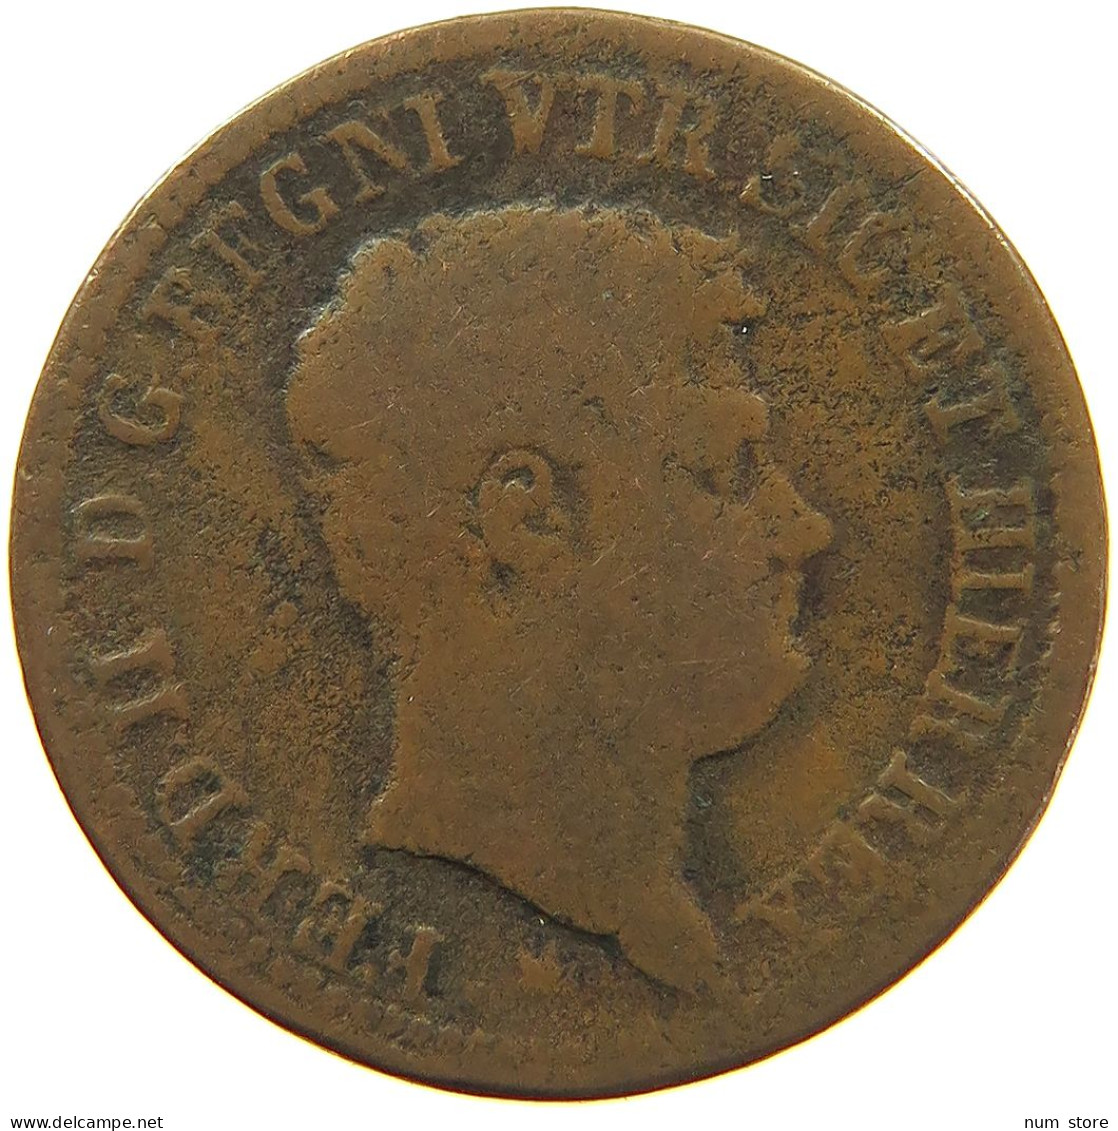 ITALY STATES 2 TORNESE 1835 TWO SICILIES #s081 0585 - Due Sicilie